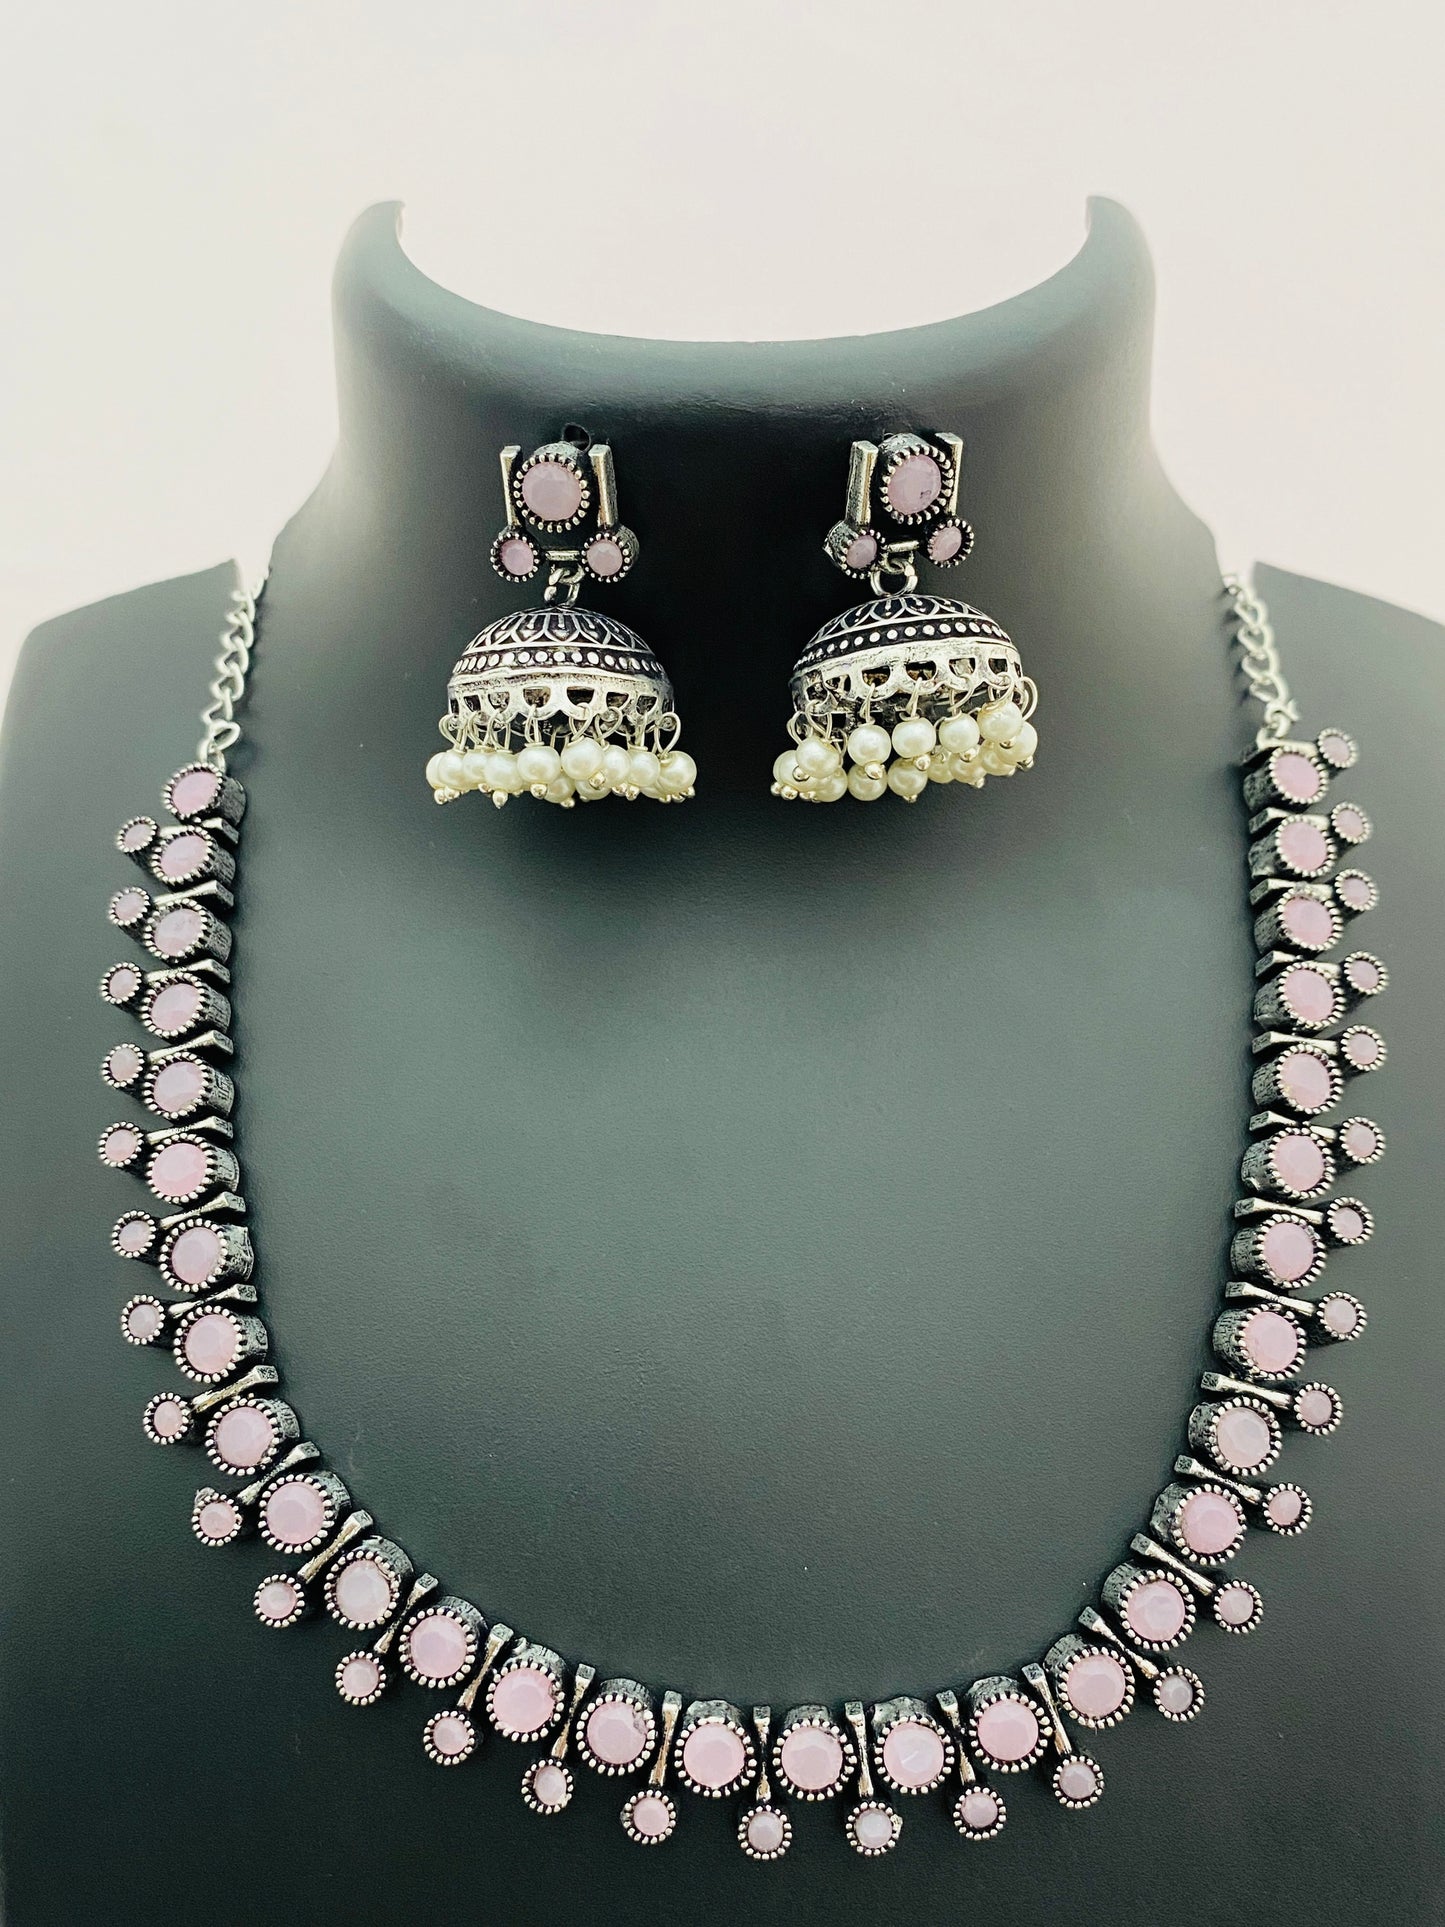 German Silver Plated Oxidized Necklace With Jhumka Earrings And Pearl Beads in Sedona